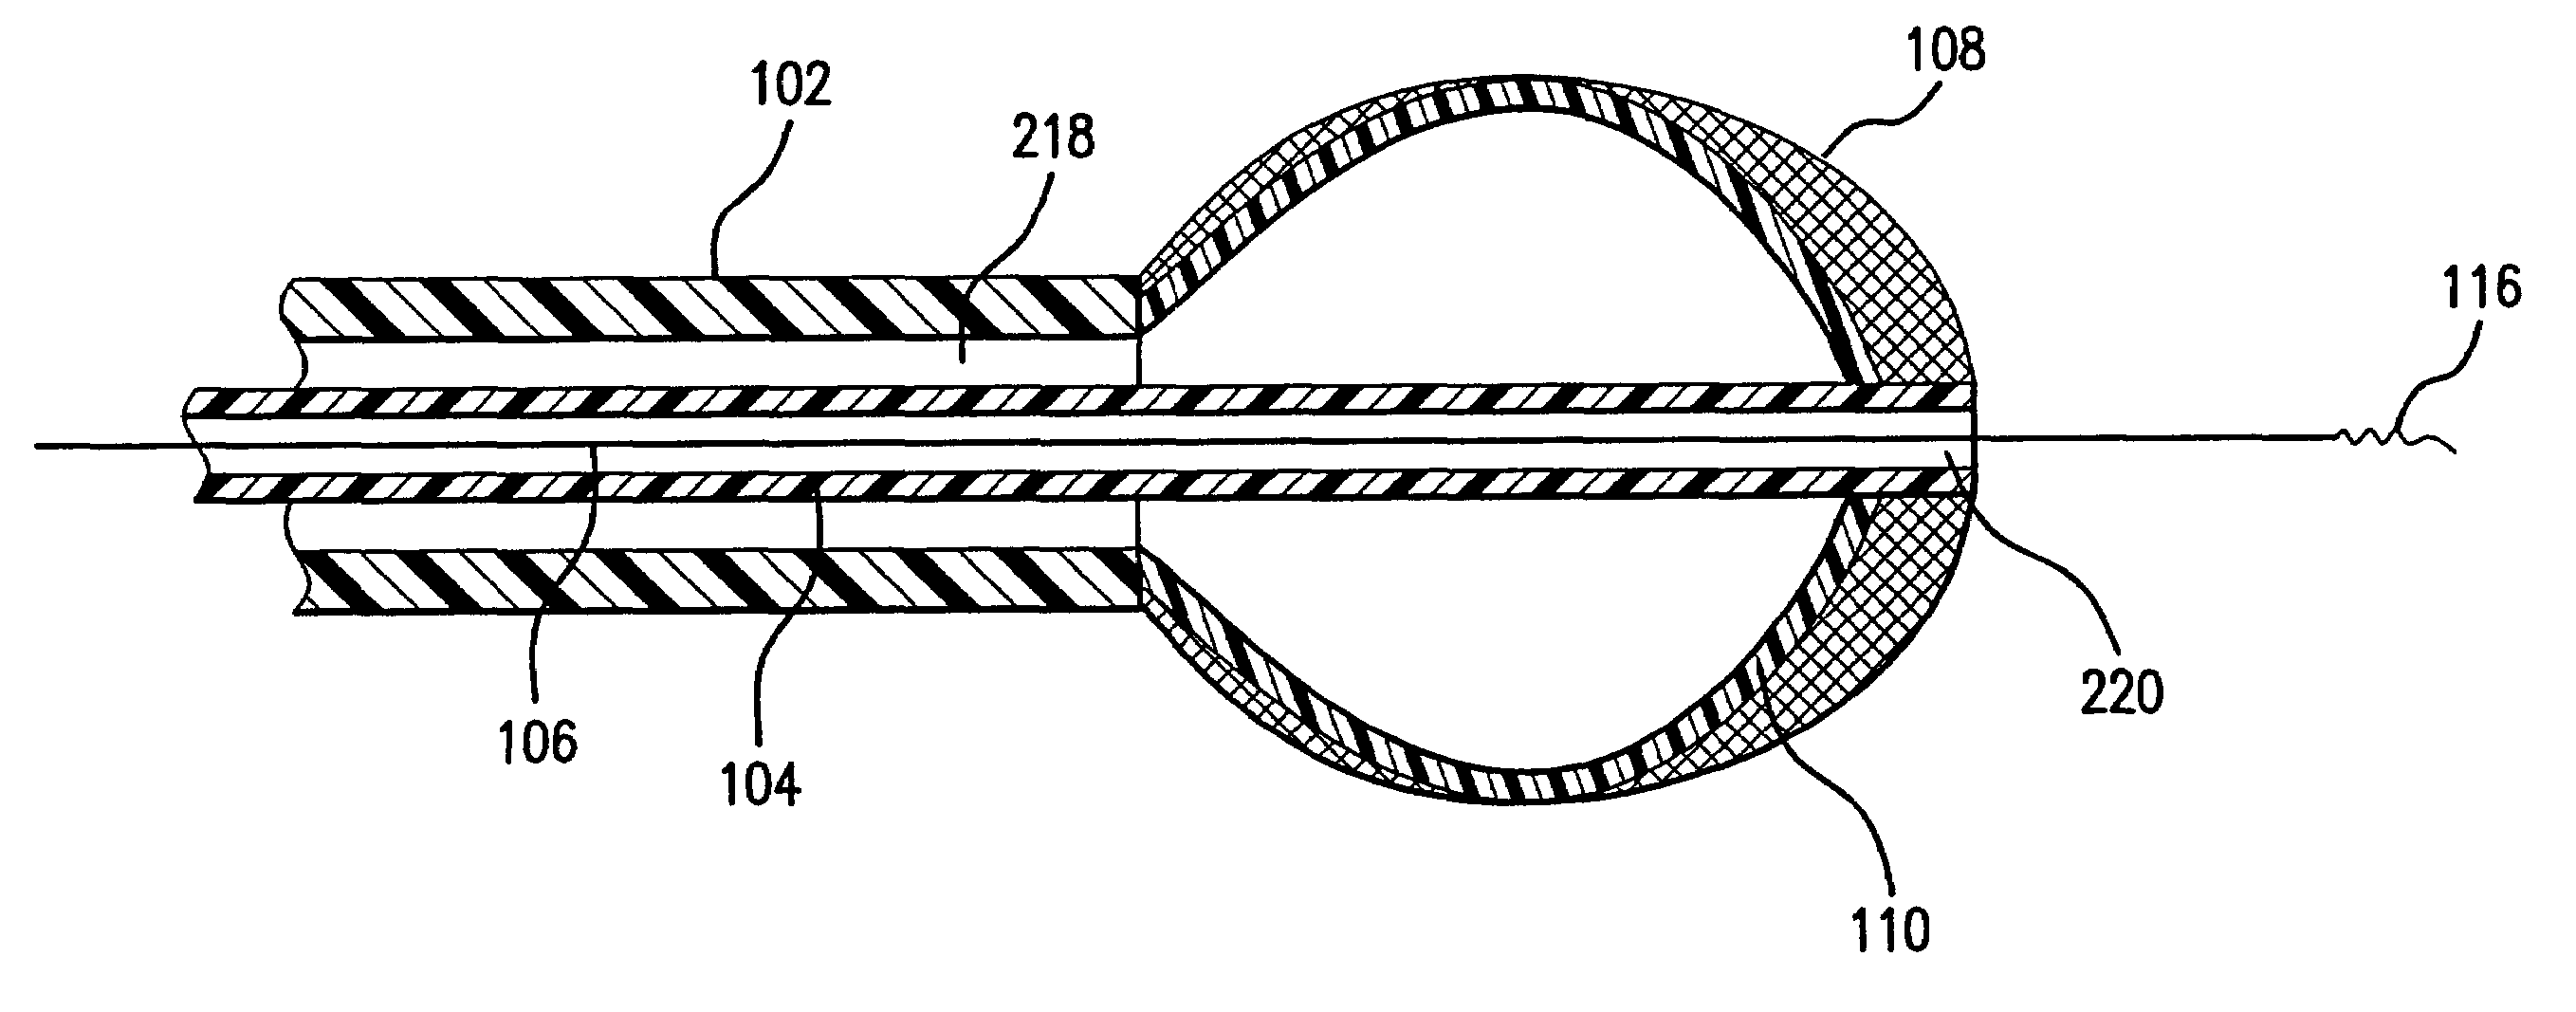 Distal protection device for filtering and occlusion